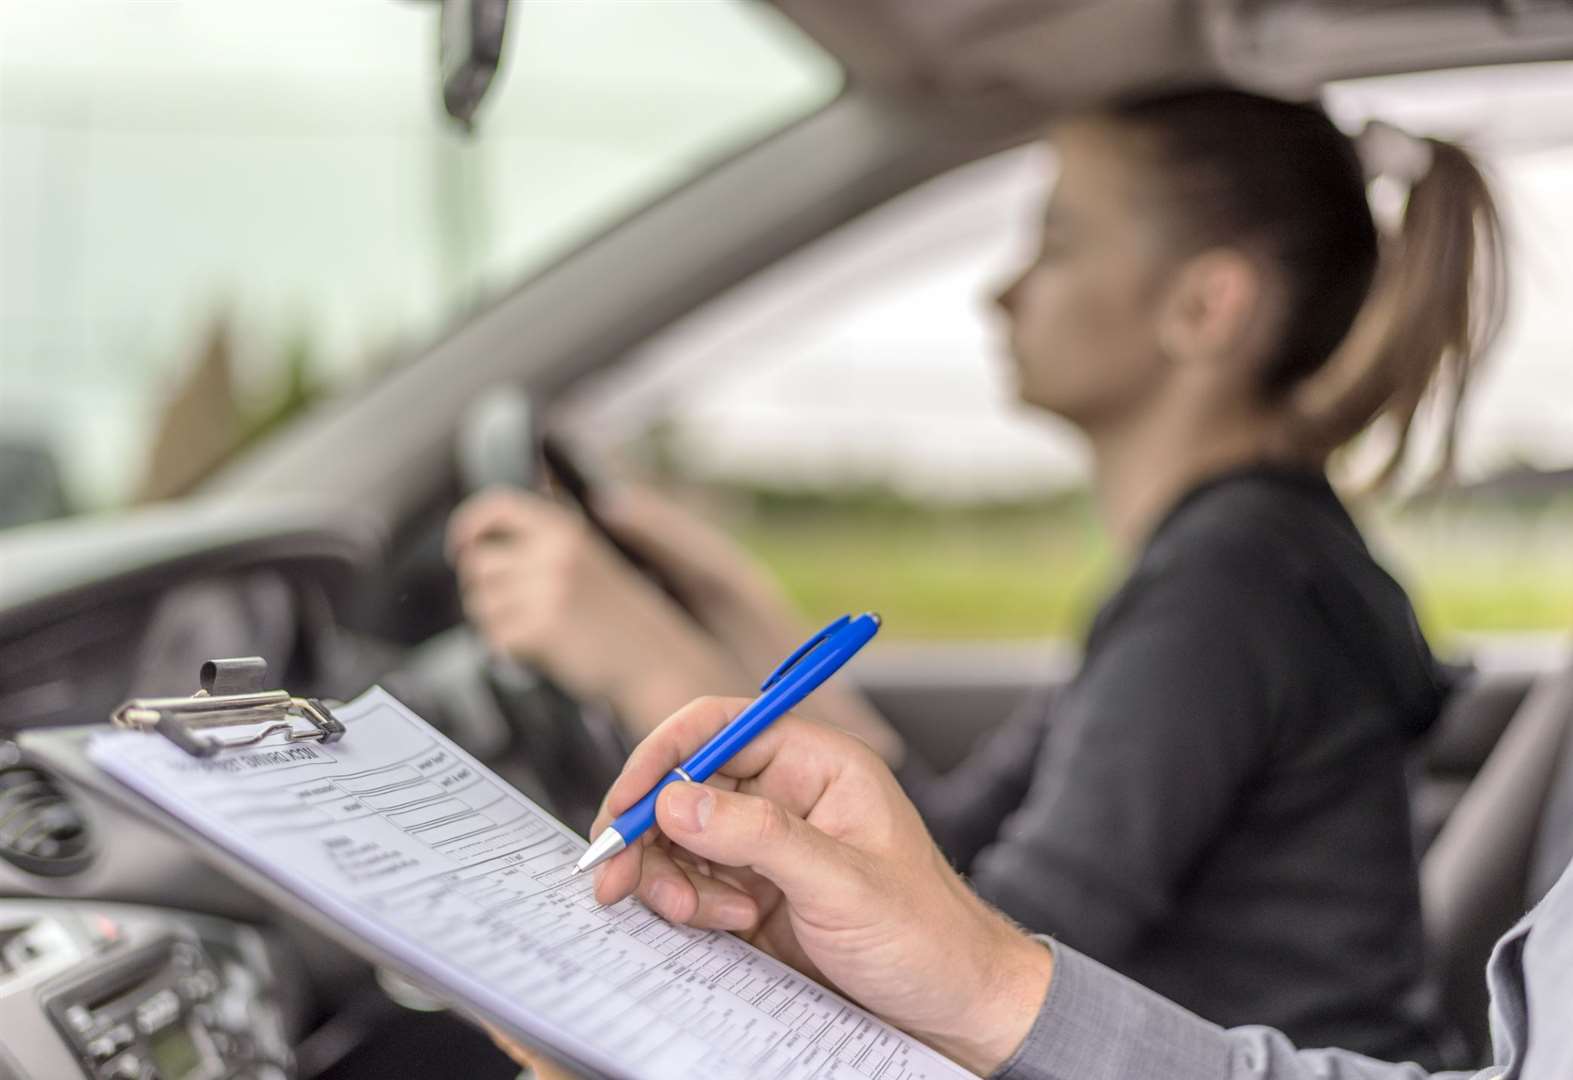 The top reasons for learner drivers failing a test have also been released